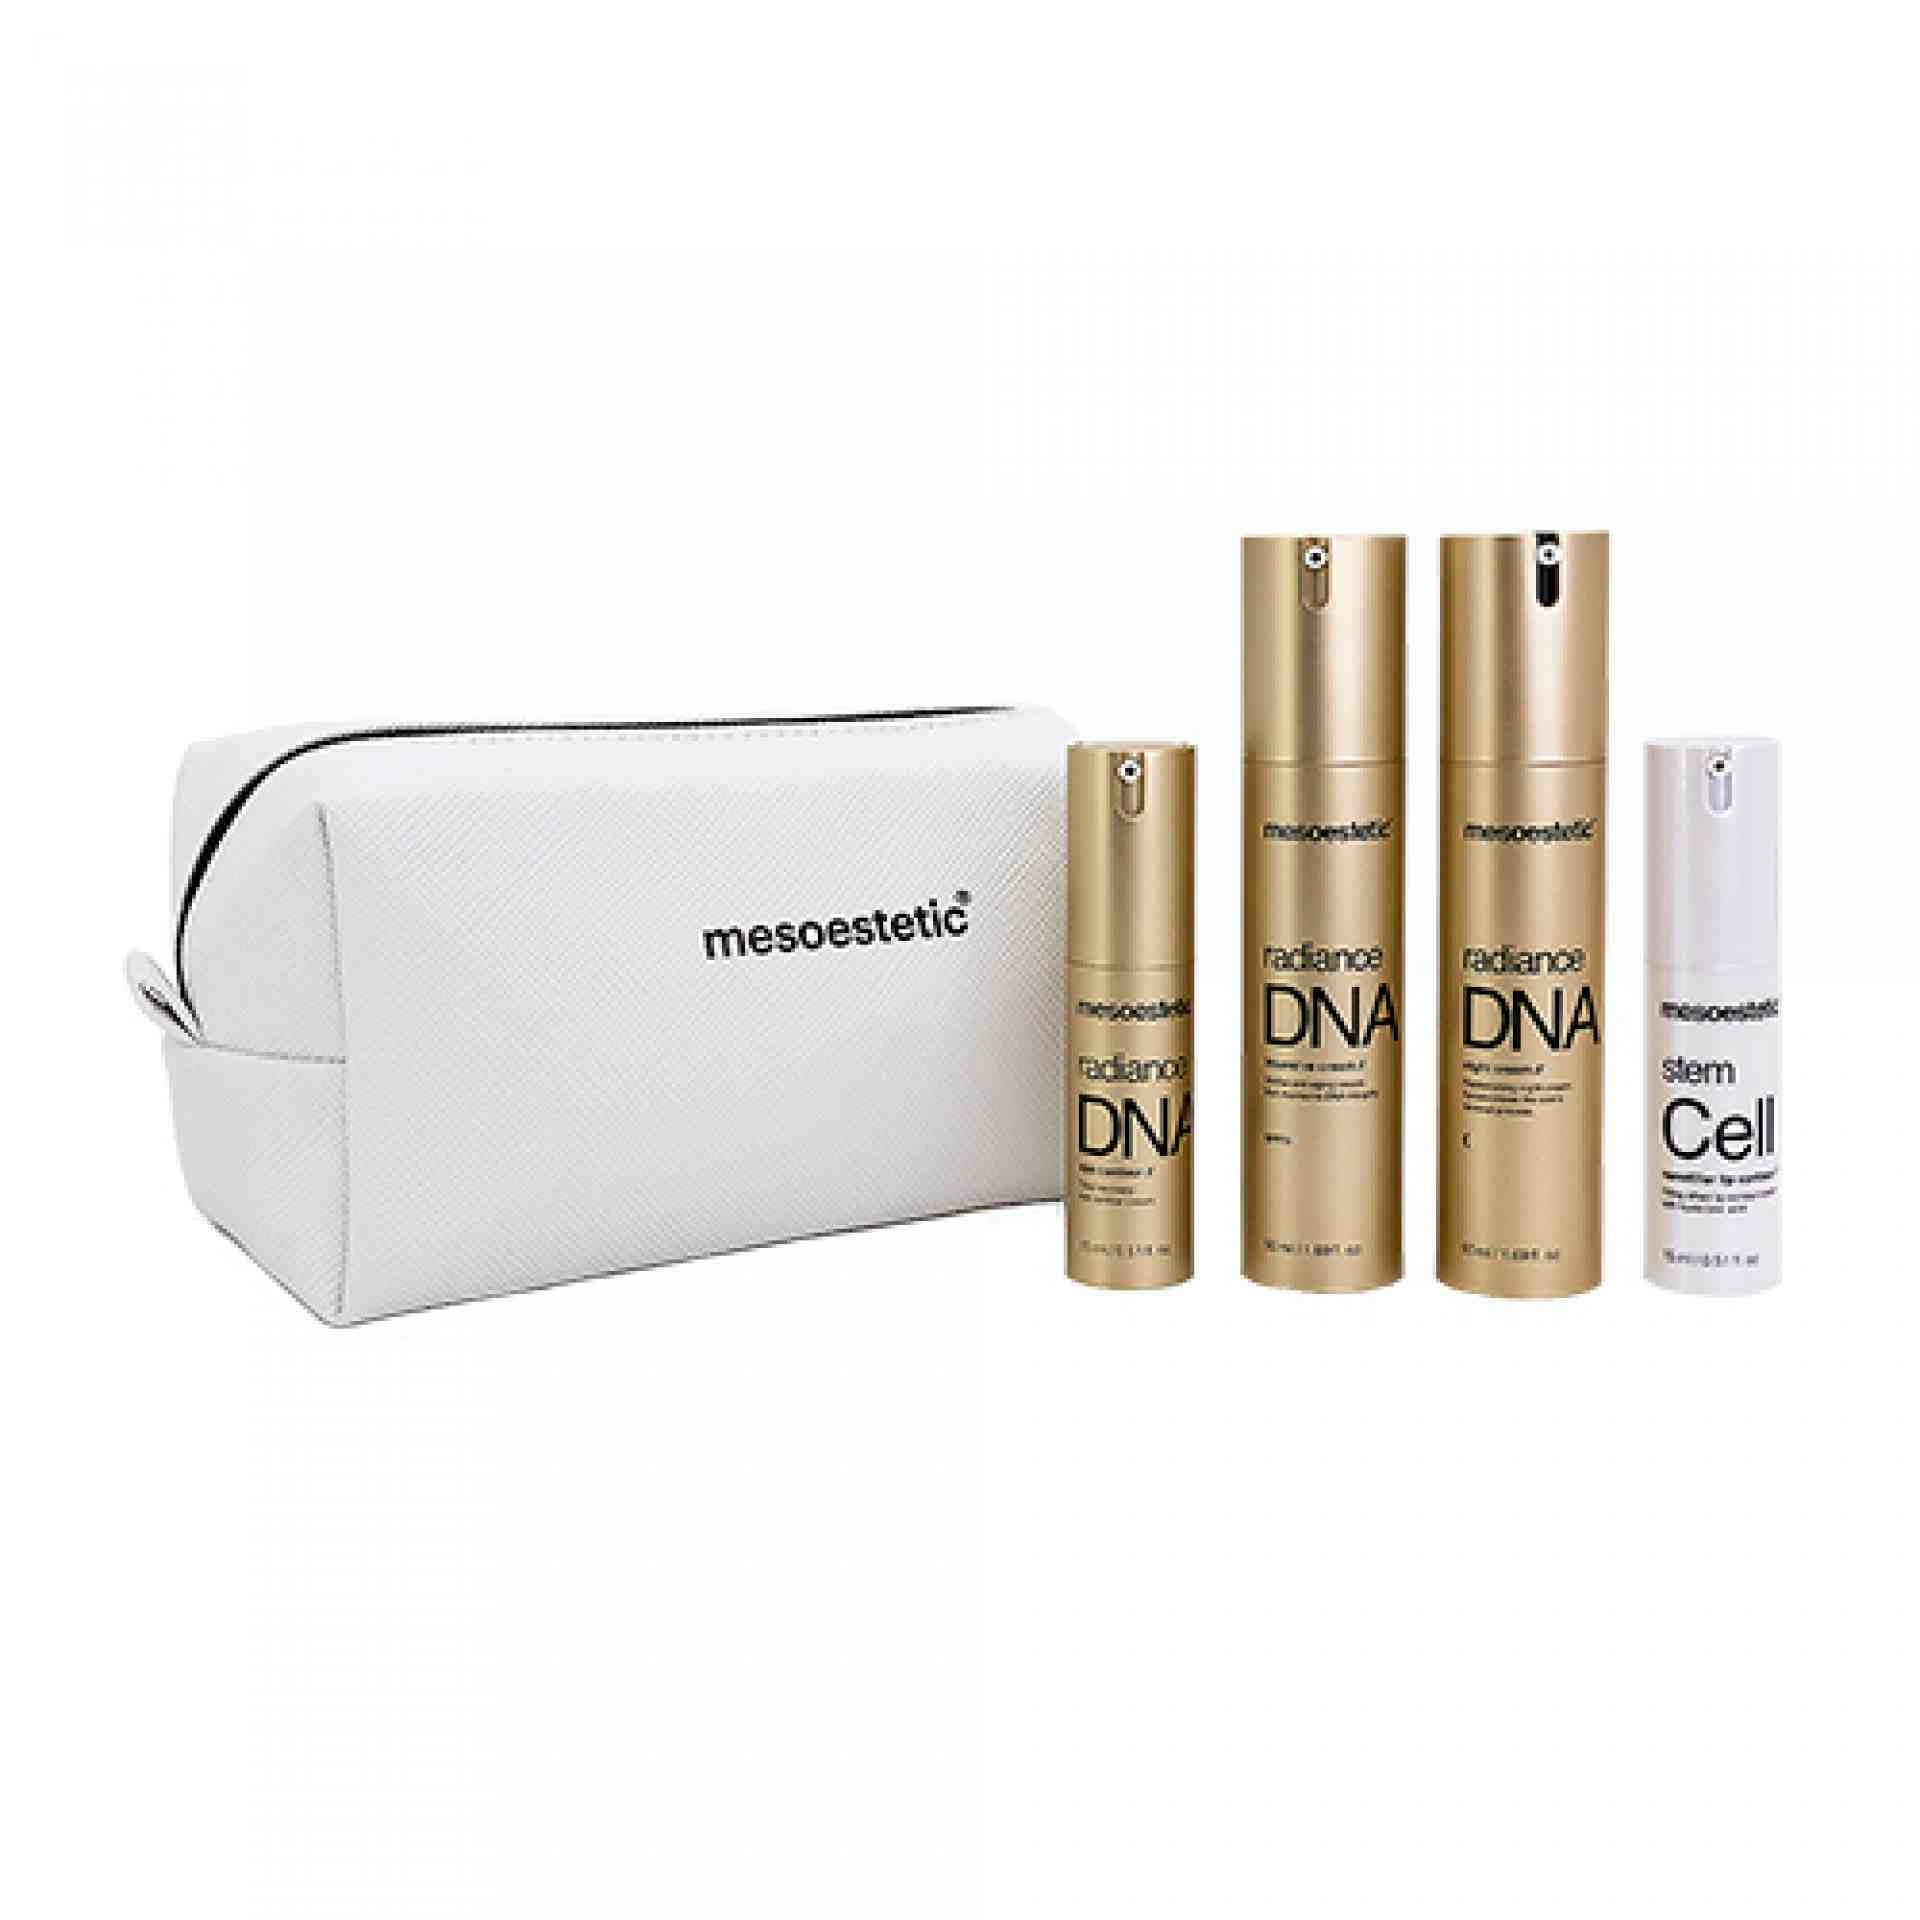 Kit pieles maduras Radiance Dna y Stem Cell - mesoestetic ®